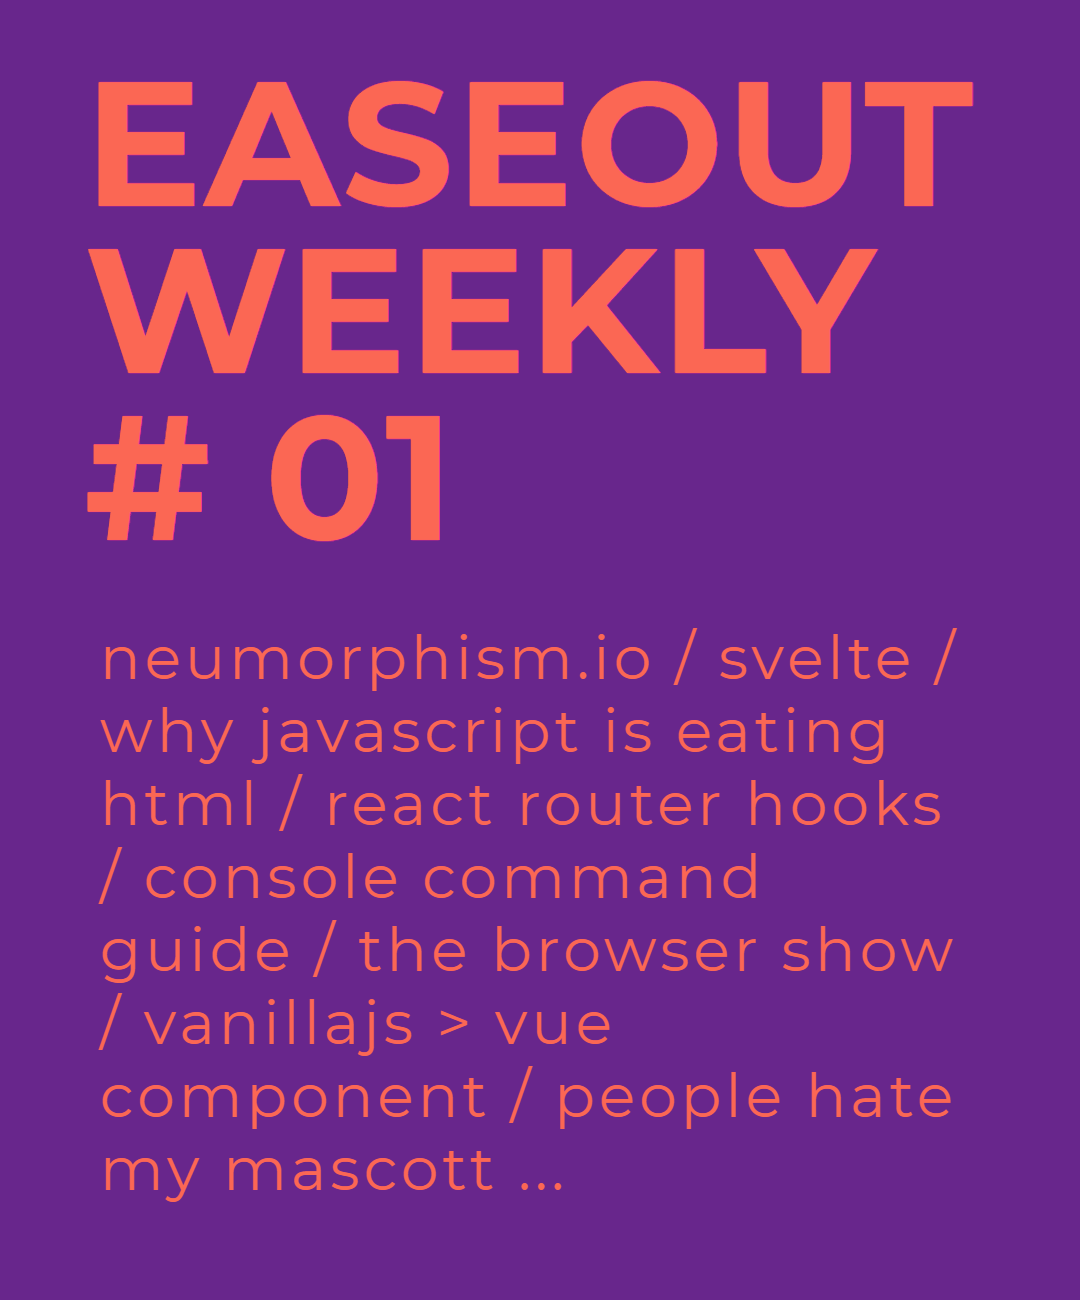 Easeout Weekly #1